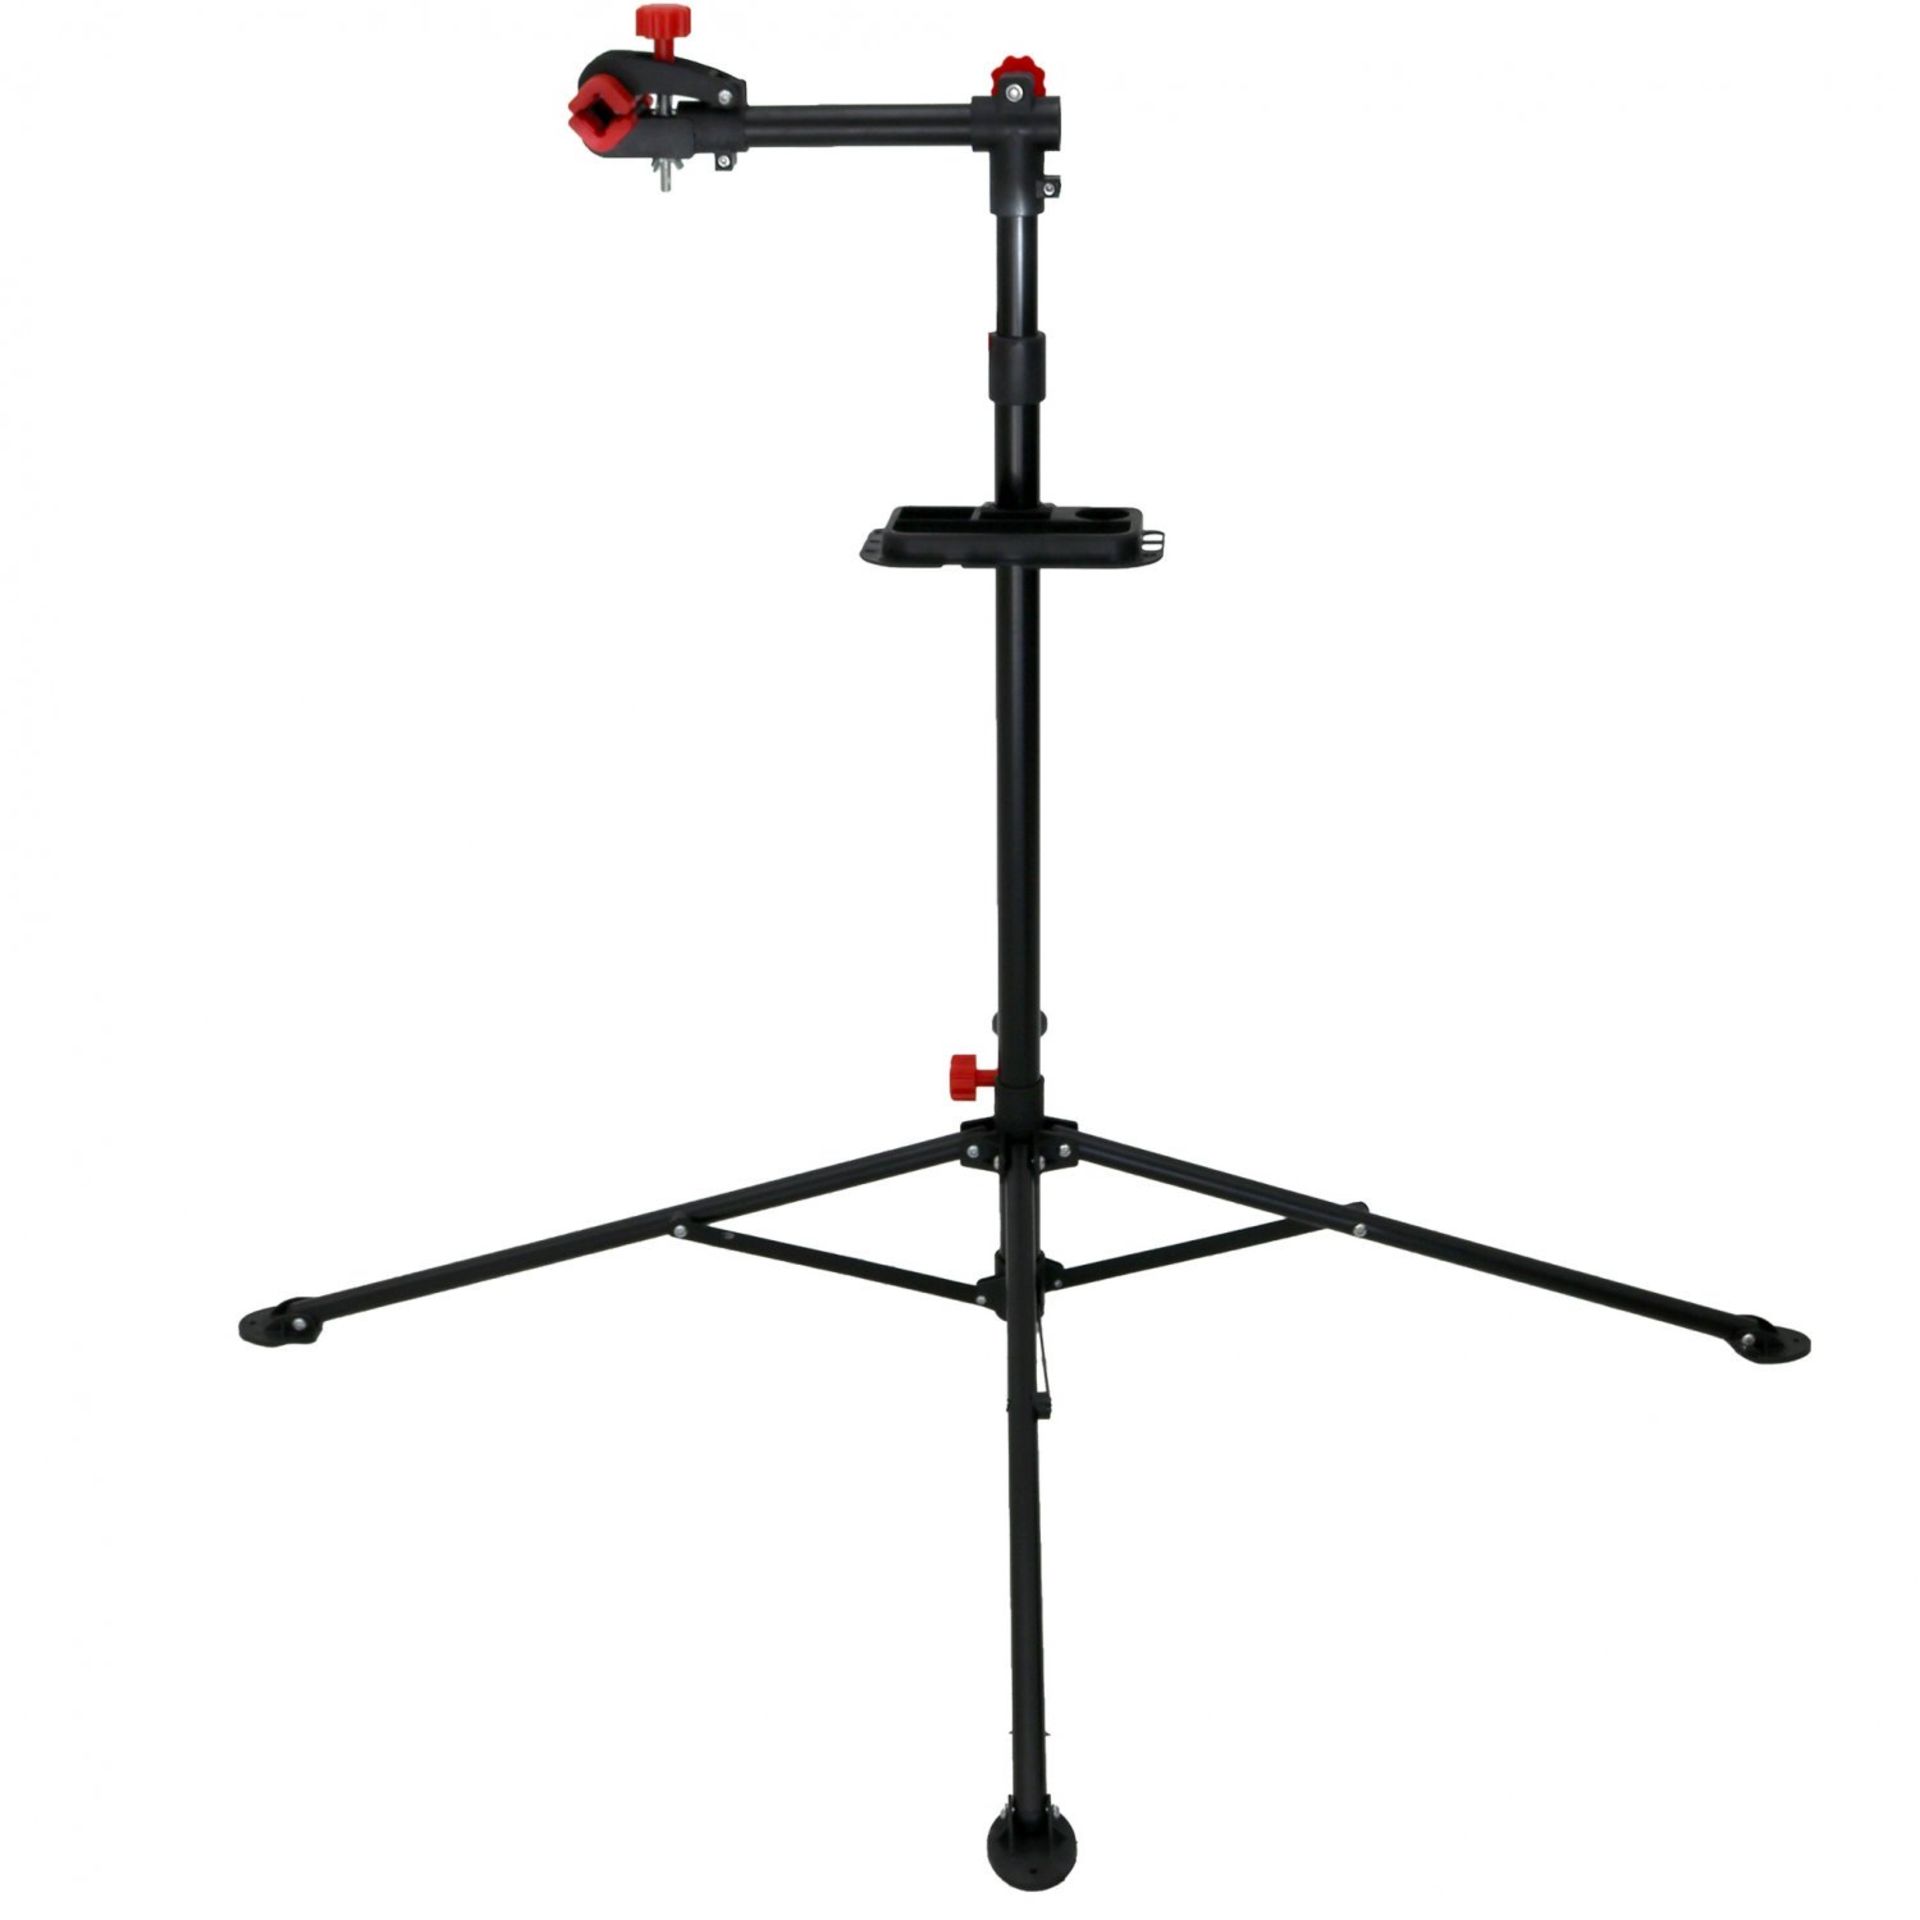 (RU254) Home Mechanic Folding Bicycle Repair Stand Latest design bike repair stand with... - Image 2 of 2